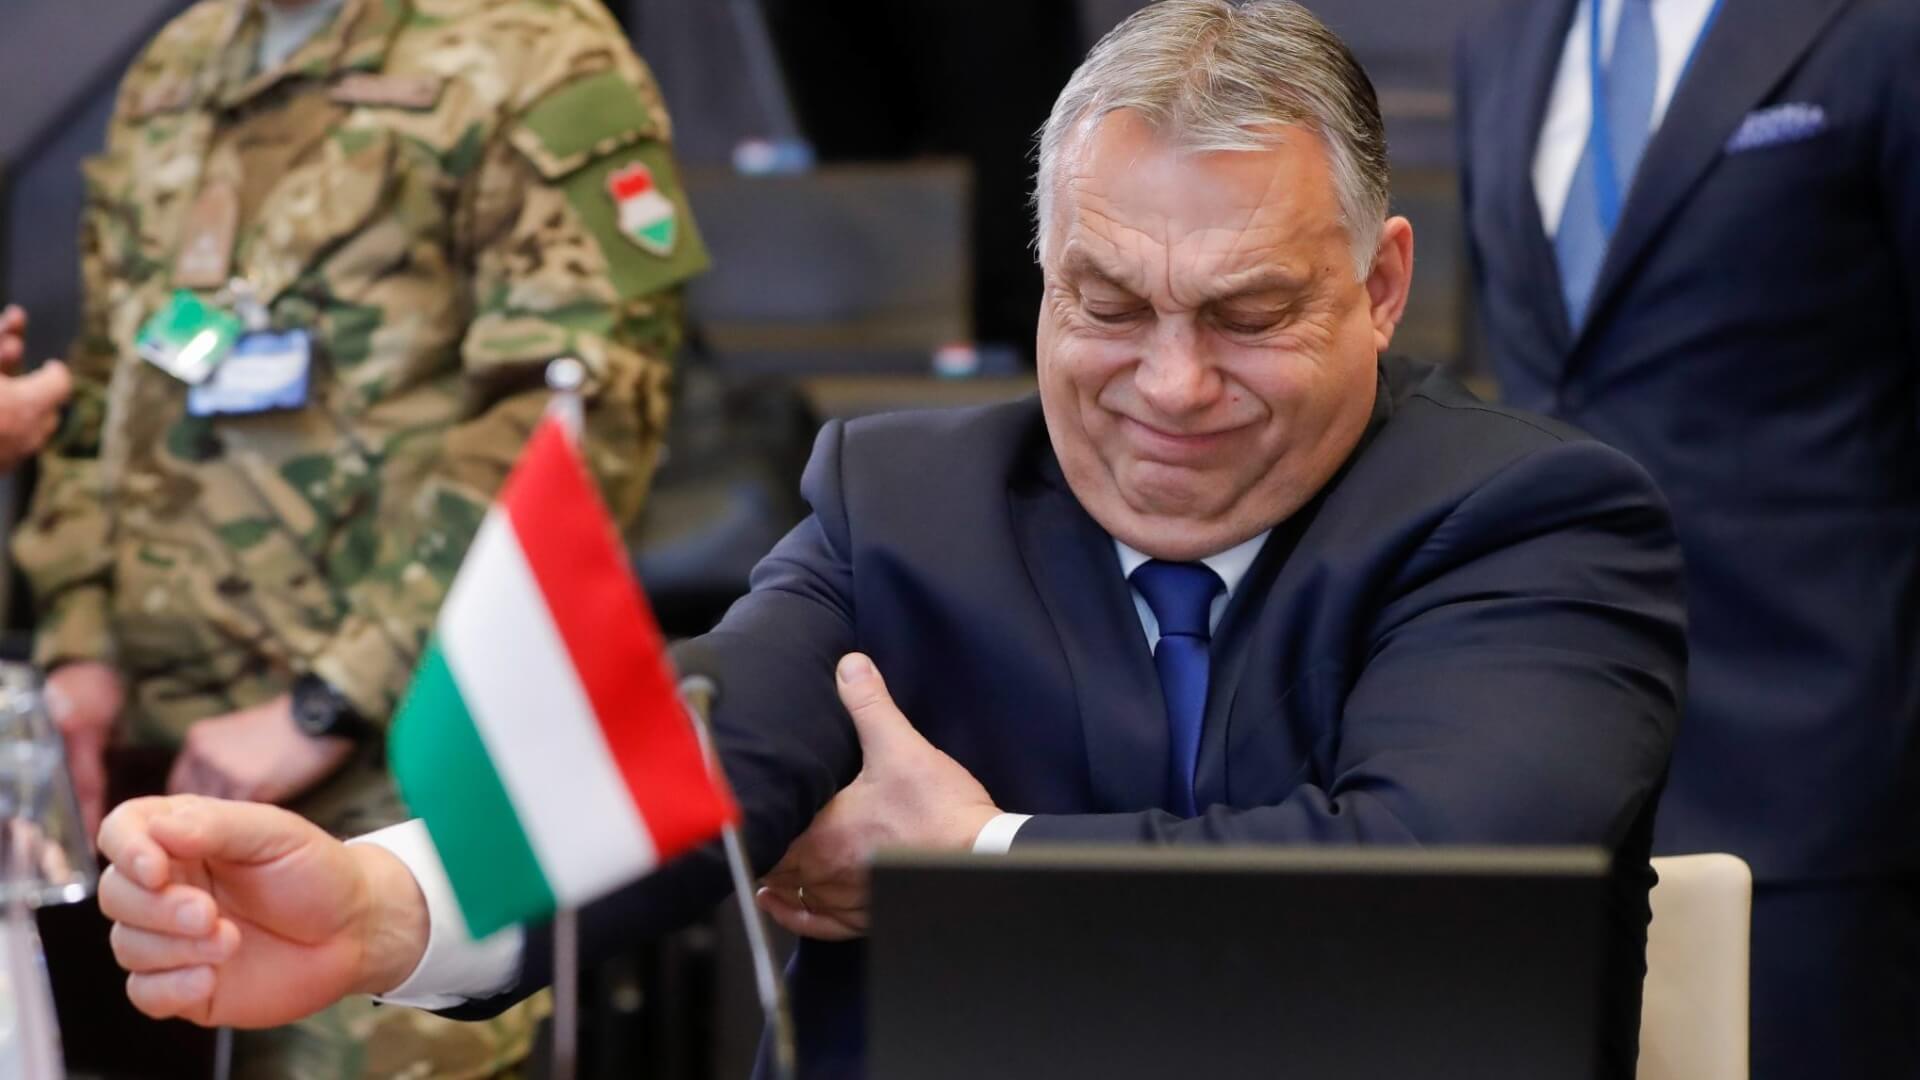 Hungary Rescinds Objection to Ukraine Aid Package After EU Slashes Frozen Funds